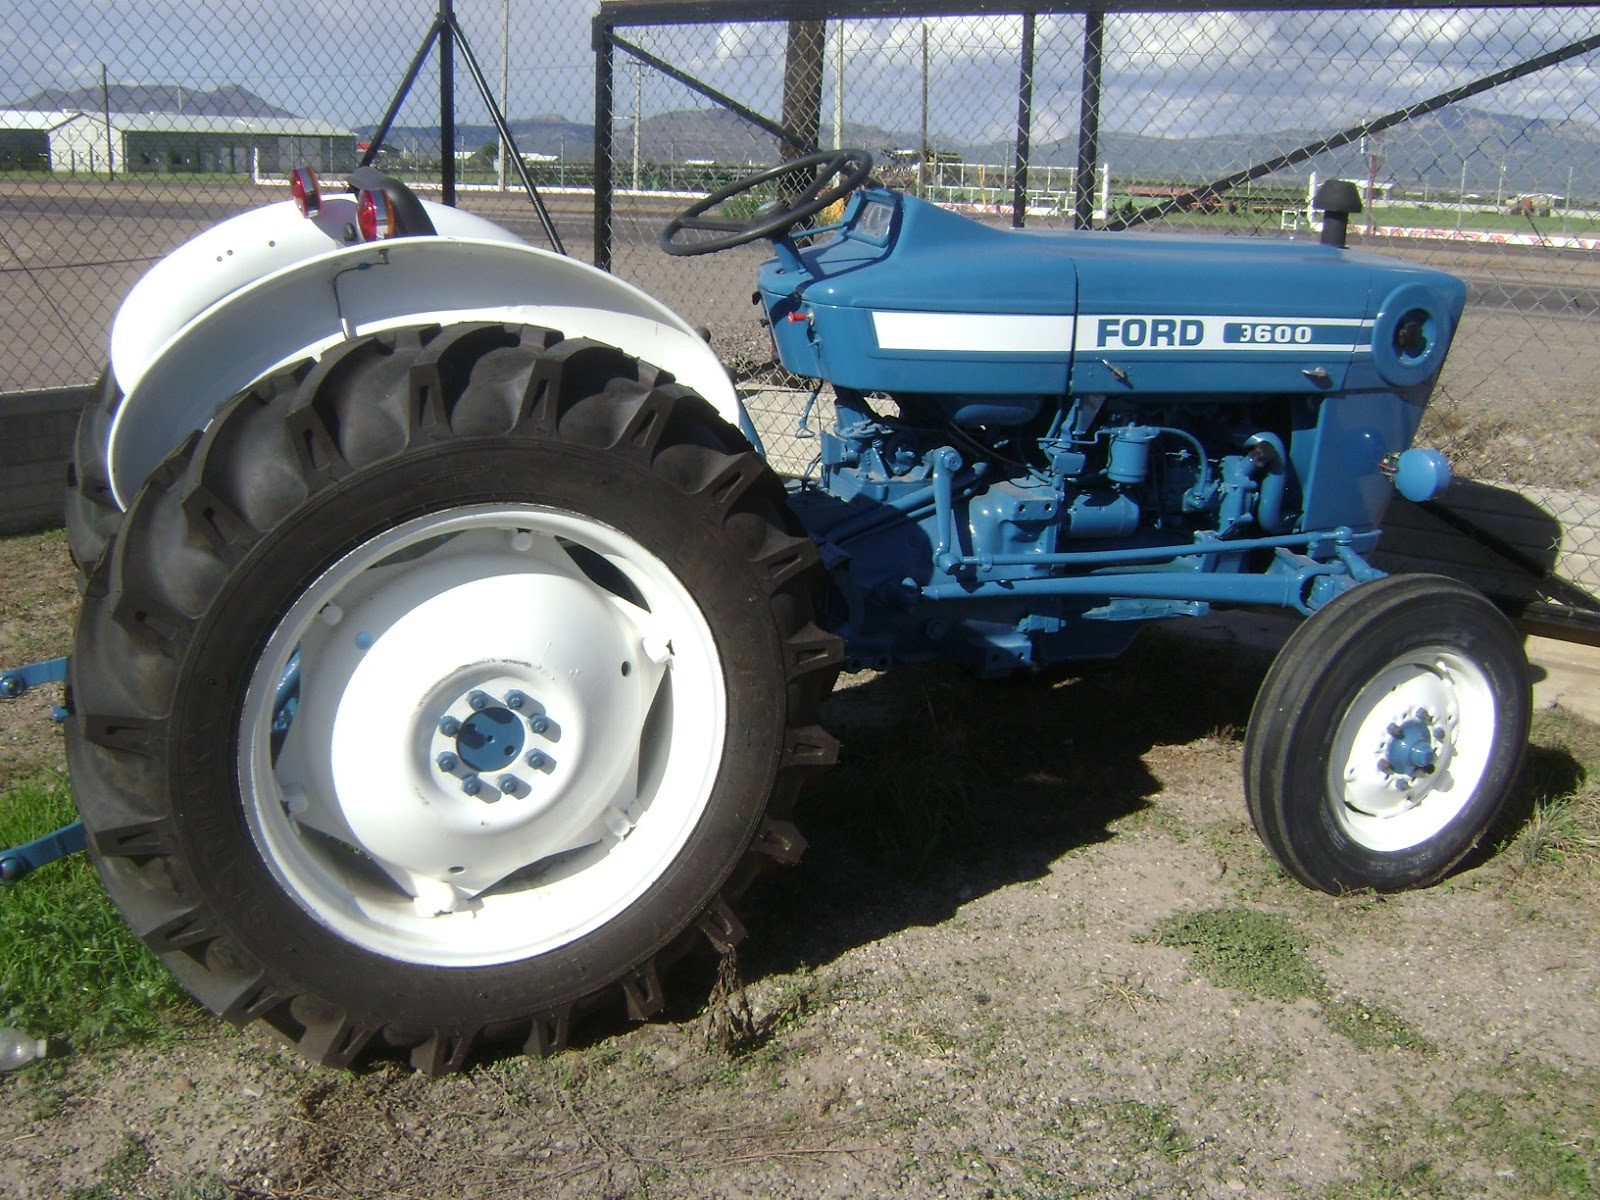 MAQUINARIA AGRICOLA INDUSTRIAL: Tractor Ford 3600 $6,500 Dlls.